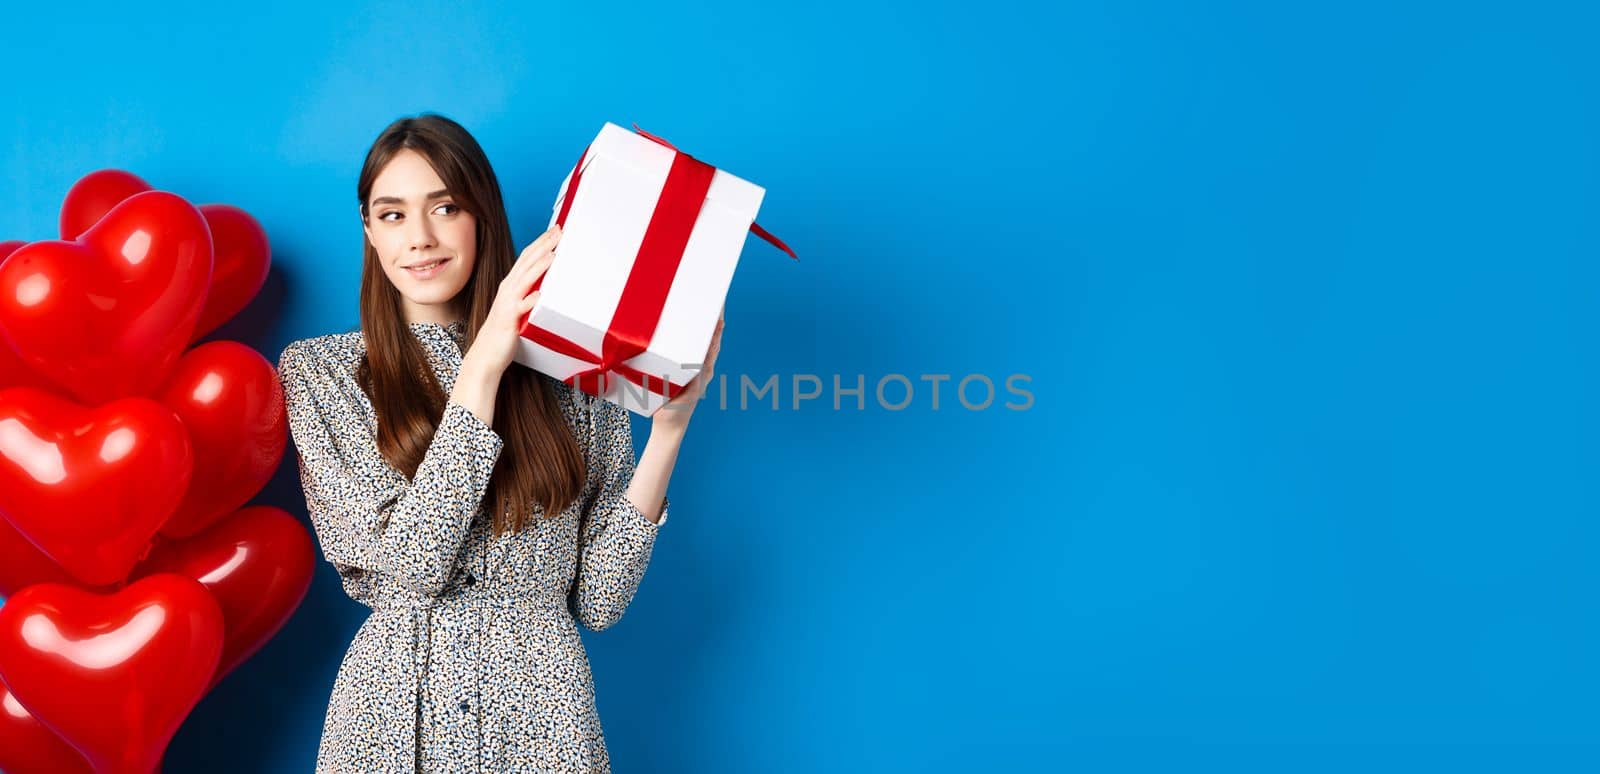 Valentines day. Beautiful woman shaking gift box to guess what inside, celebrating lovers holiday, standing near red hearts, blue background.